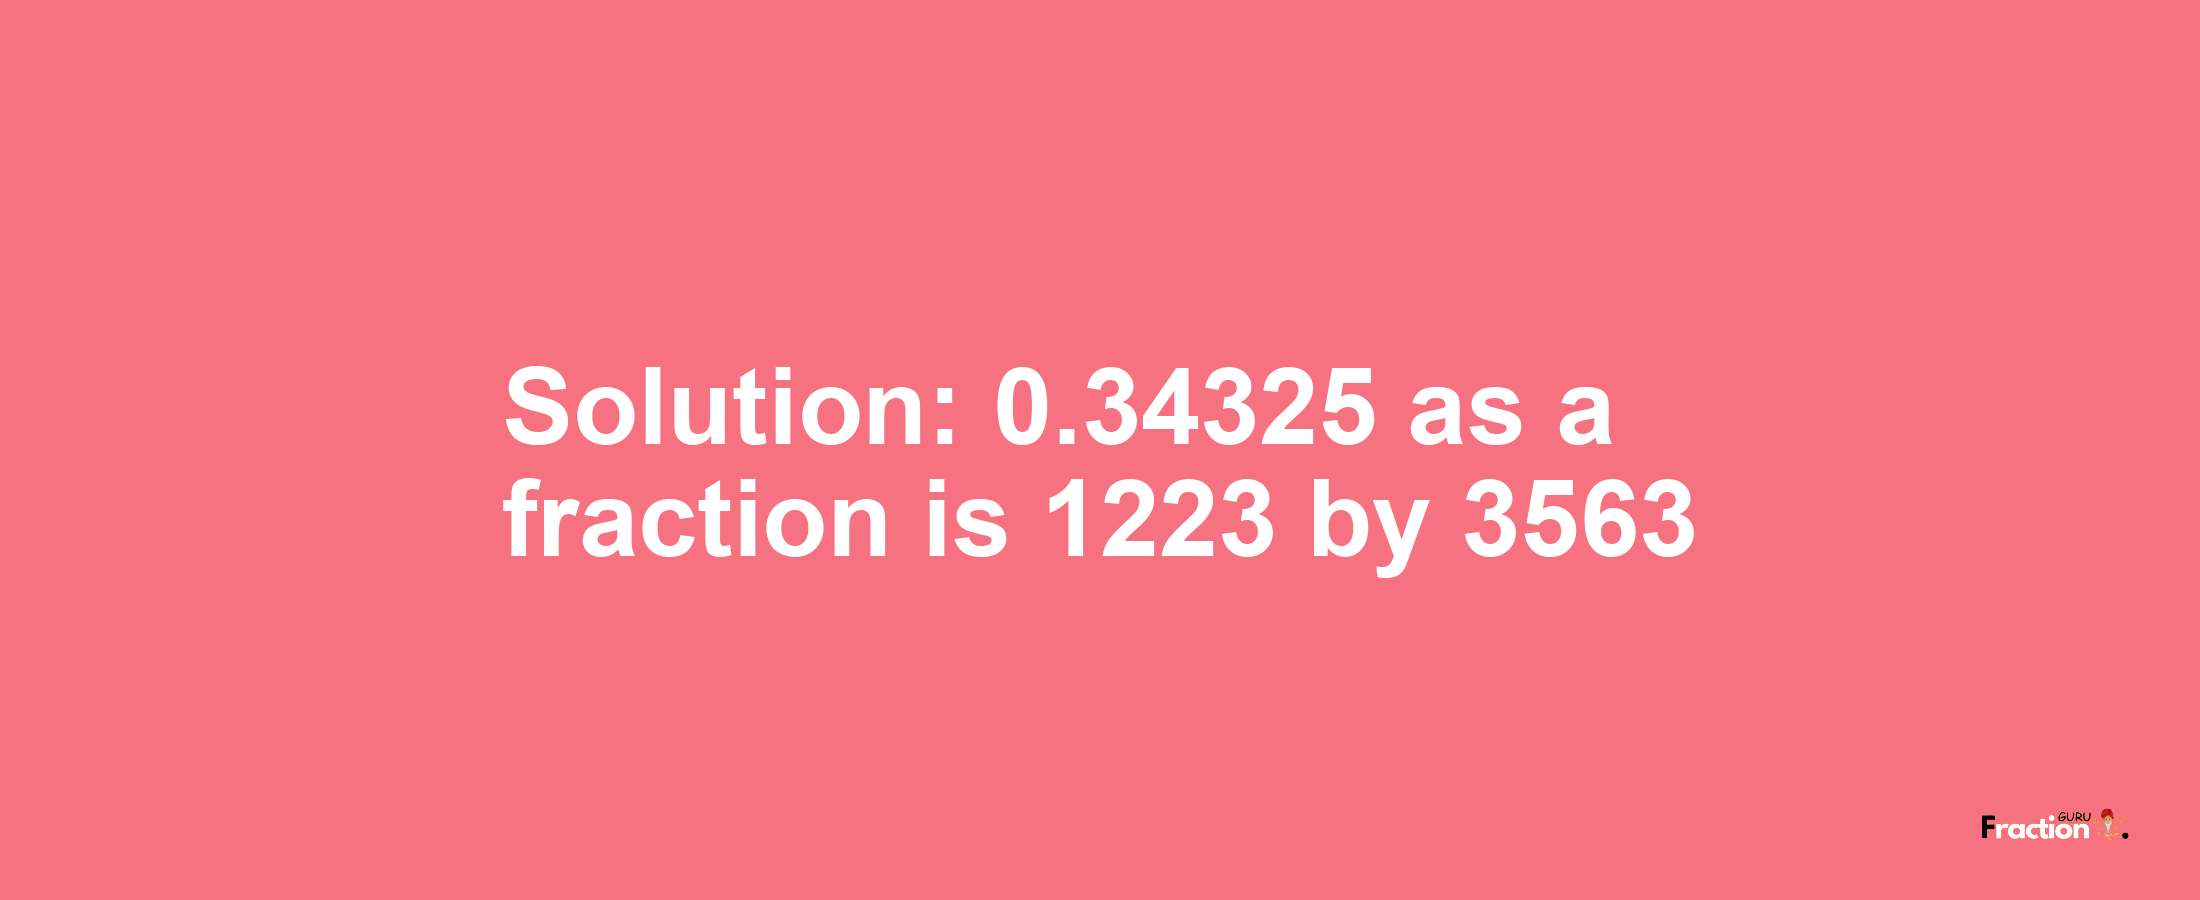 Solution:0.34325 as a fraction is 1223/3563